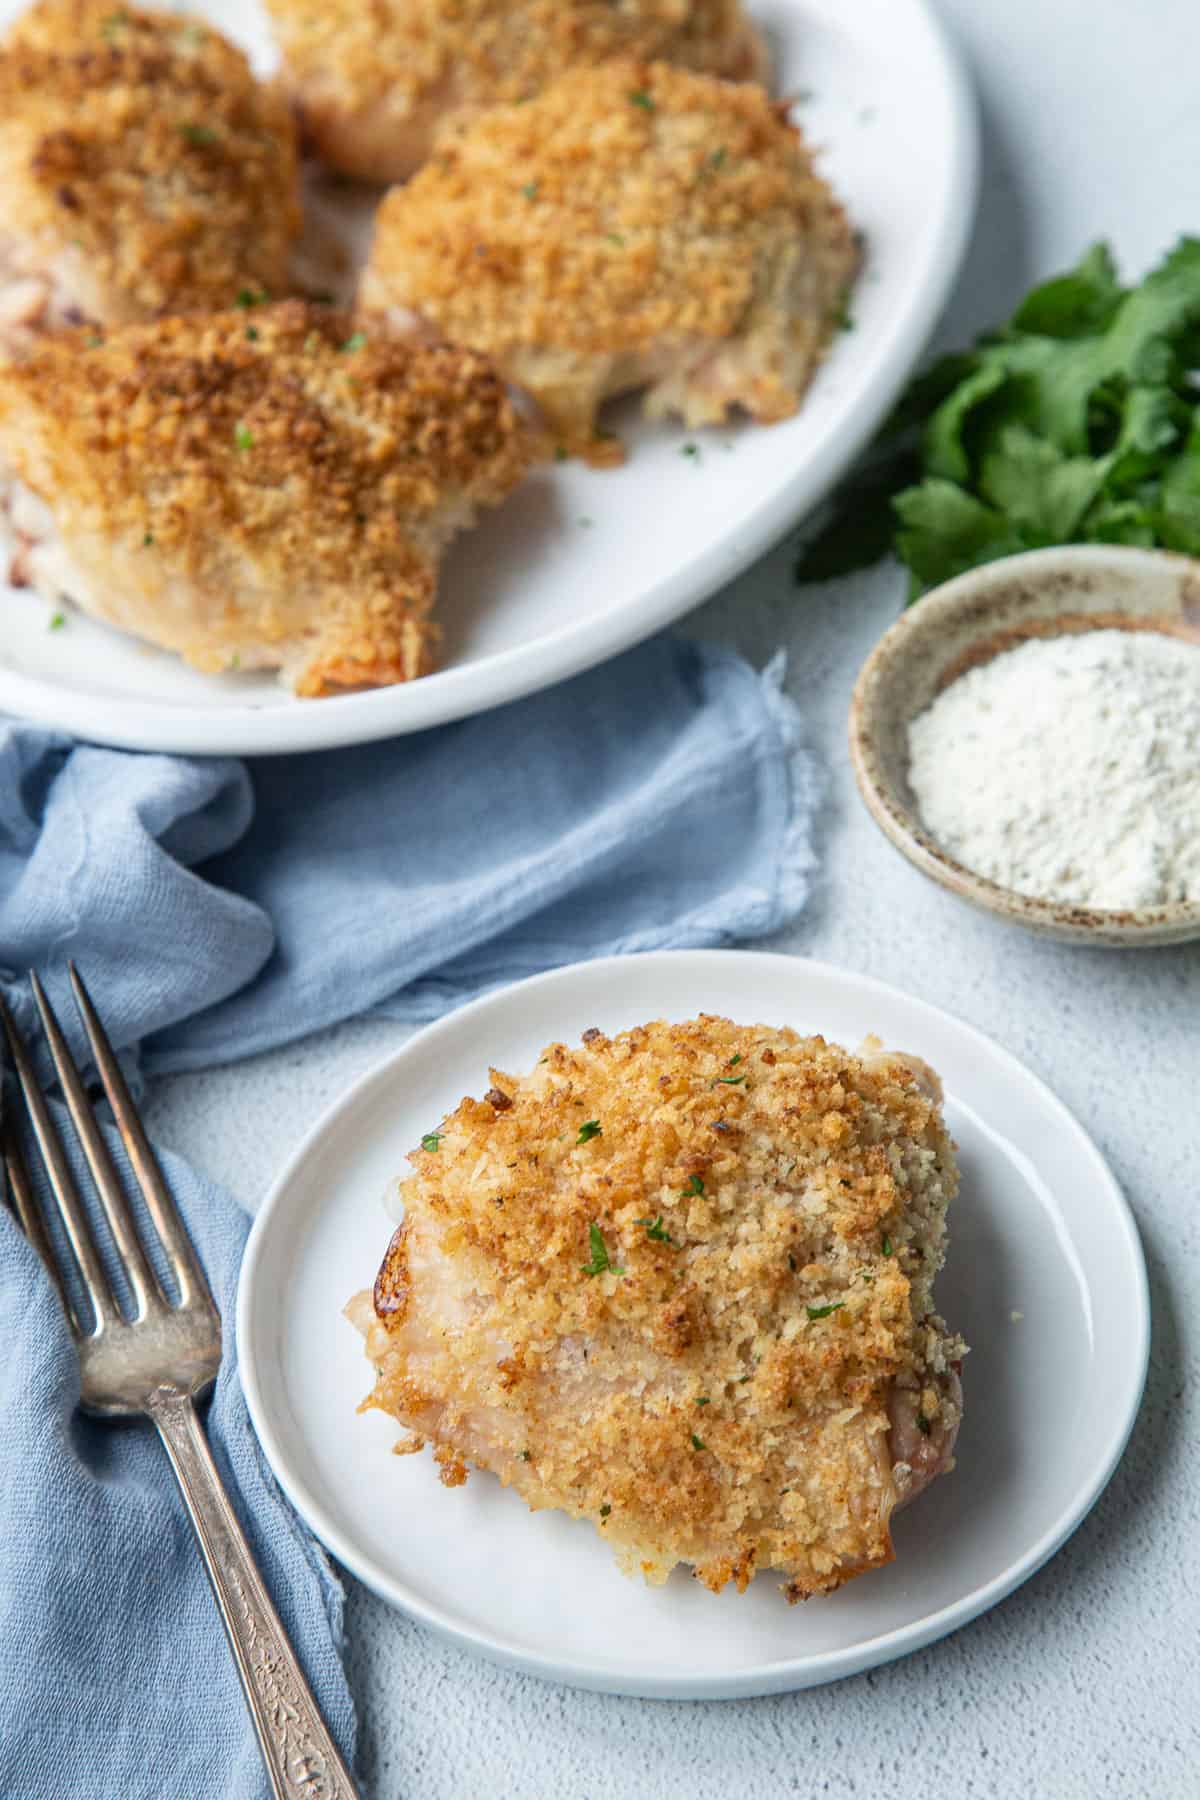 ranch chicken thigh on a white plate, next to a plate of additional breadcrumb topped chicken thighs.